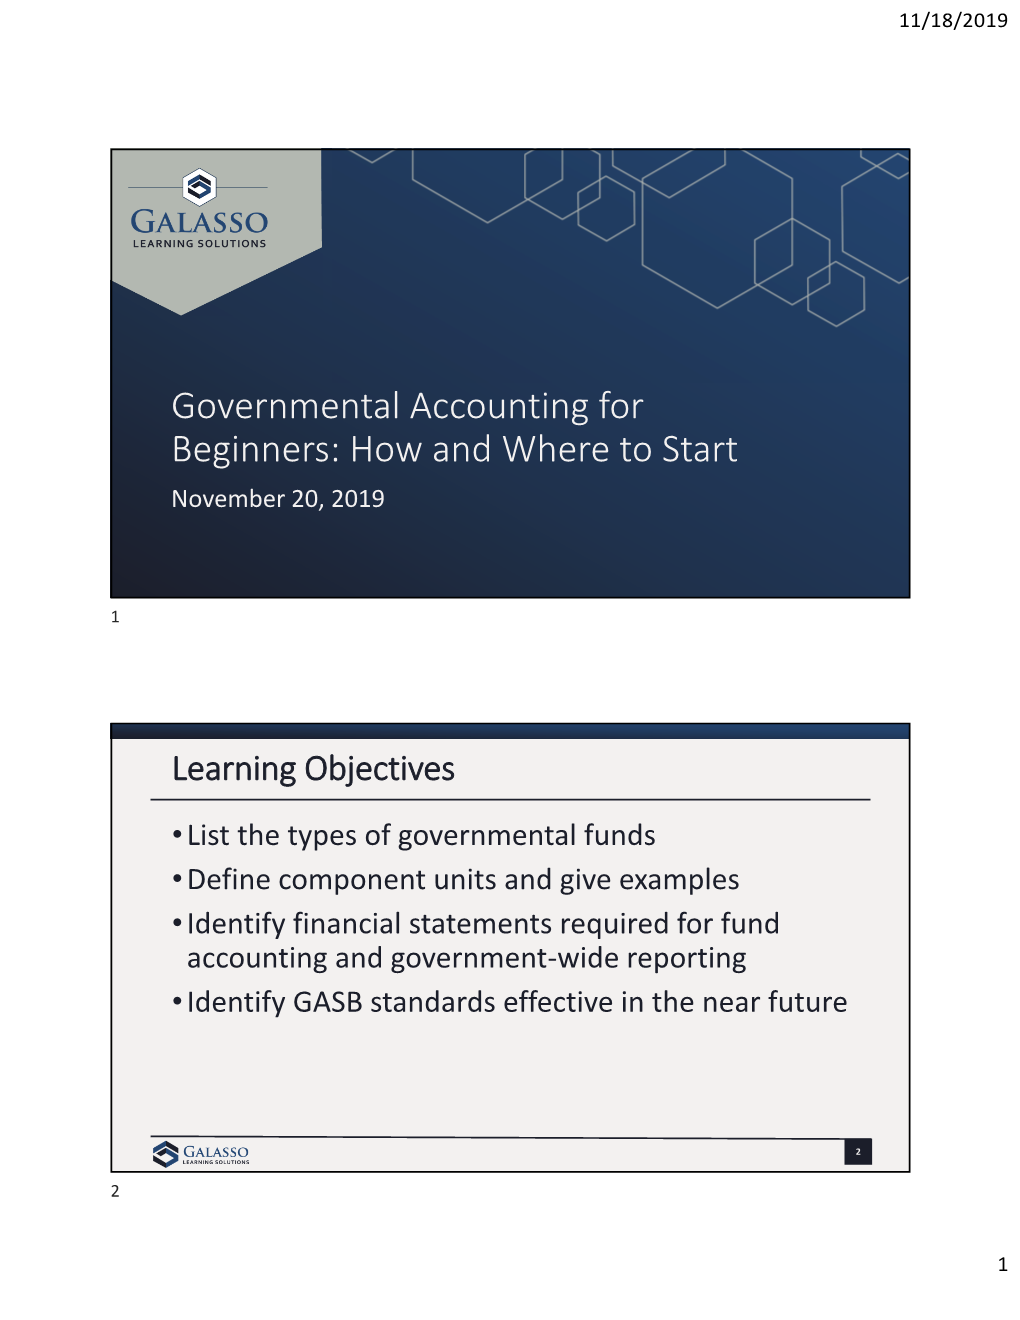 Governmental Accounting for Beginners: How and Where to Start November 20, 2019